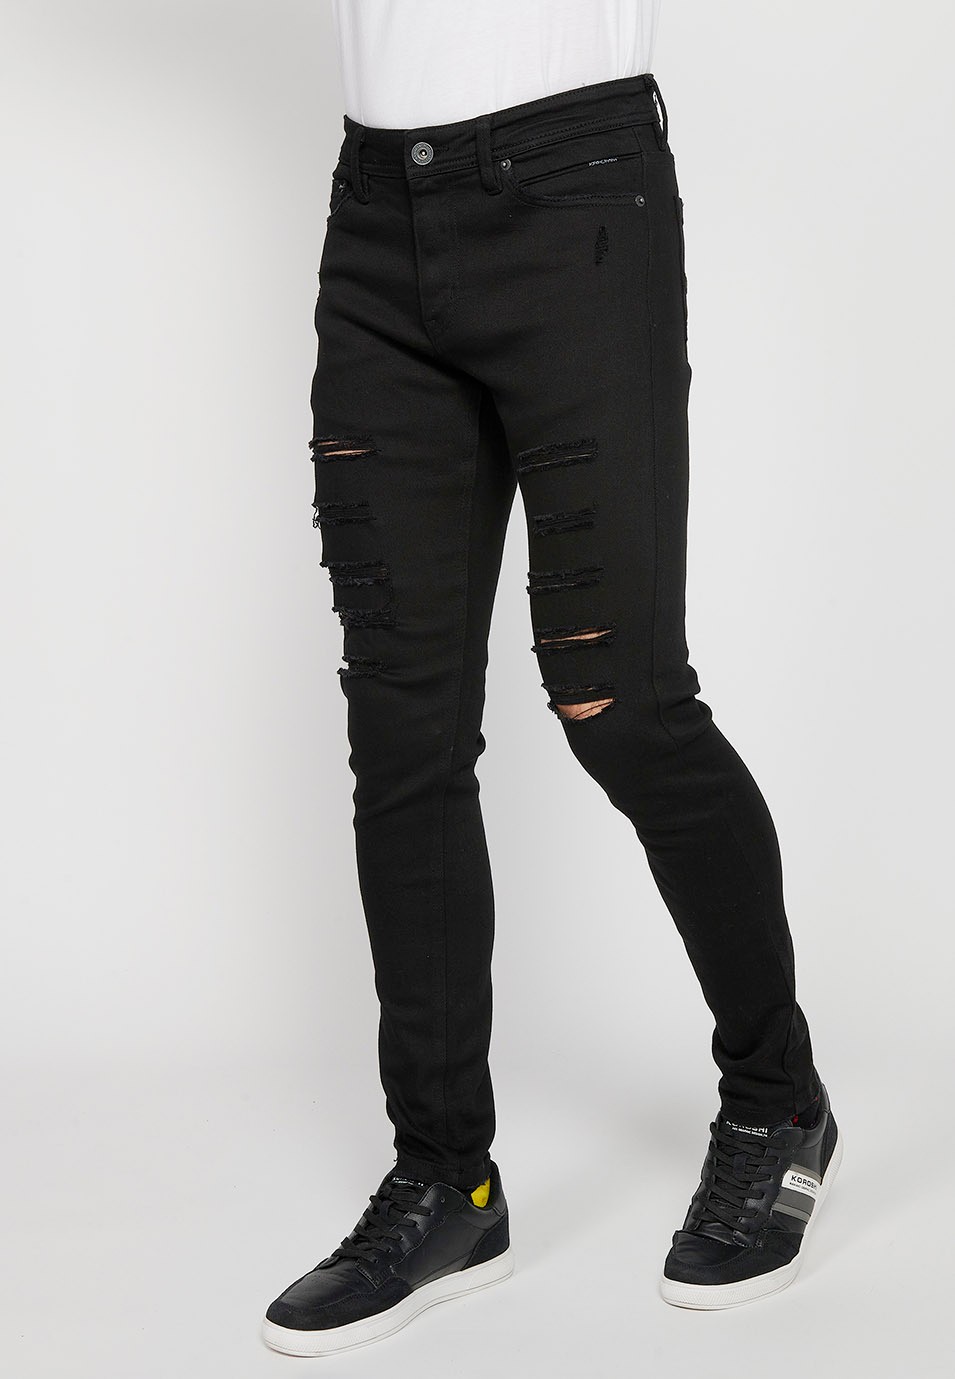 Long slim super skinny jeans with front closure with zipper and button in Black Denim Color for Men 1